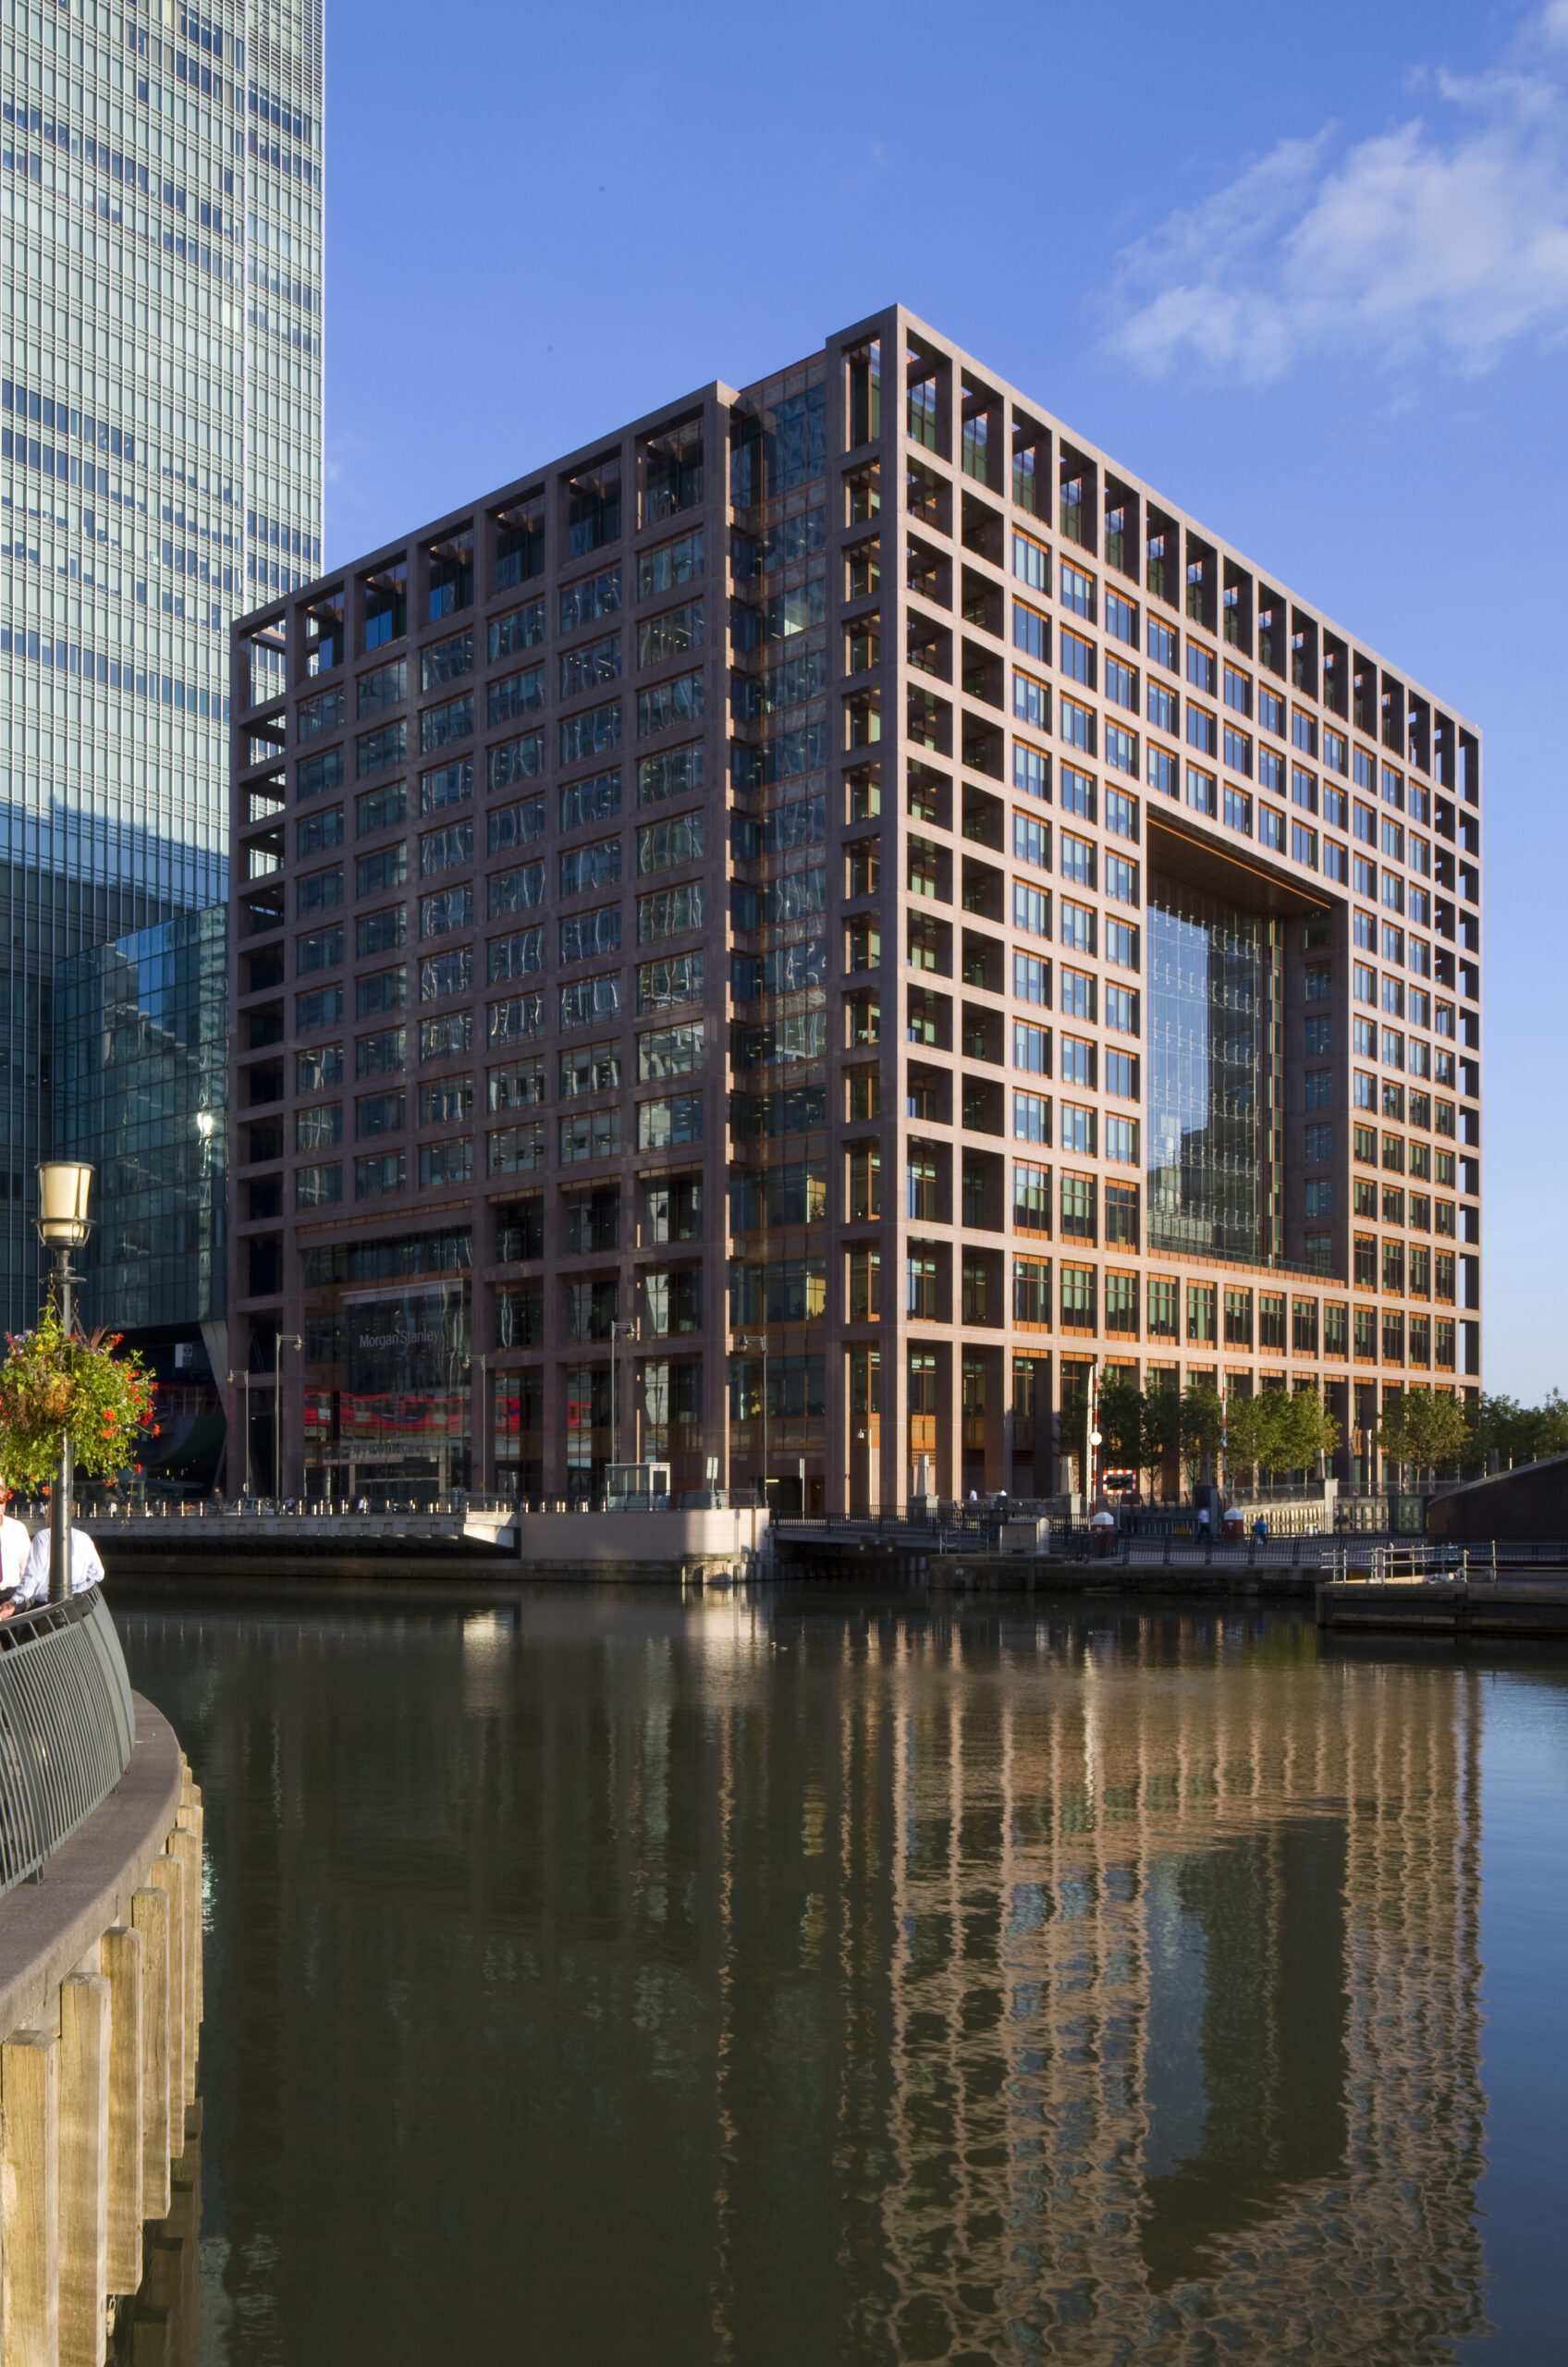 Morgan Stanley recommits to Canary Wharf